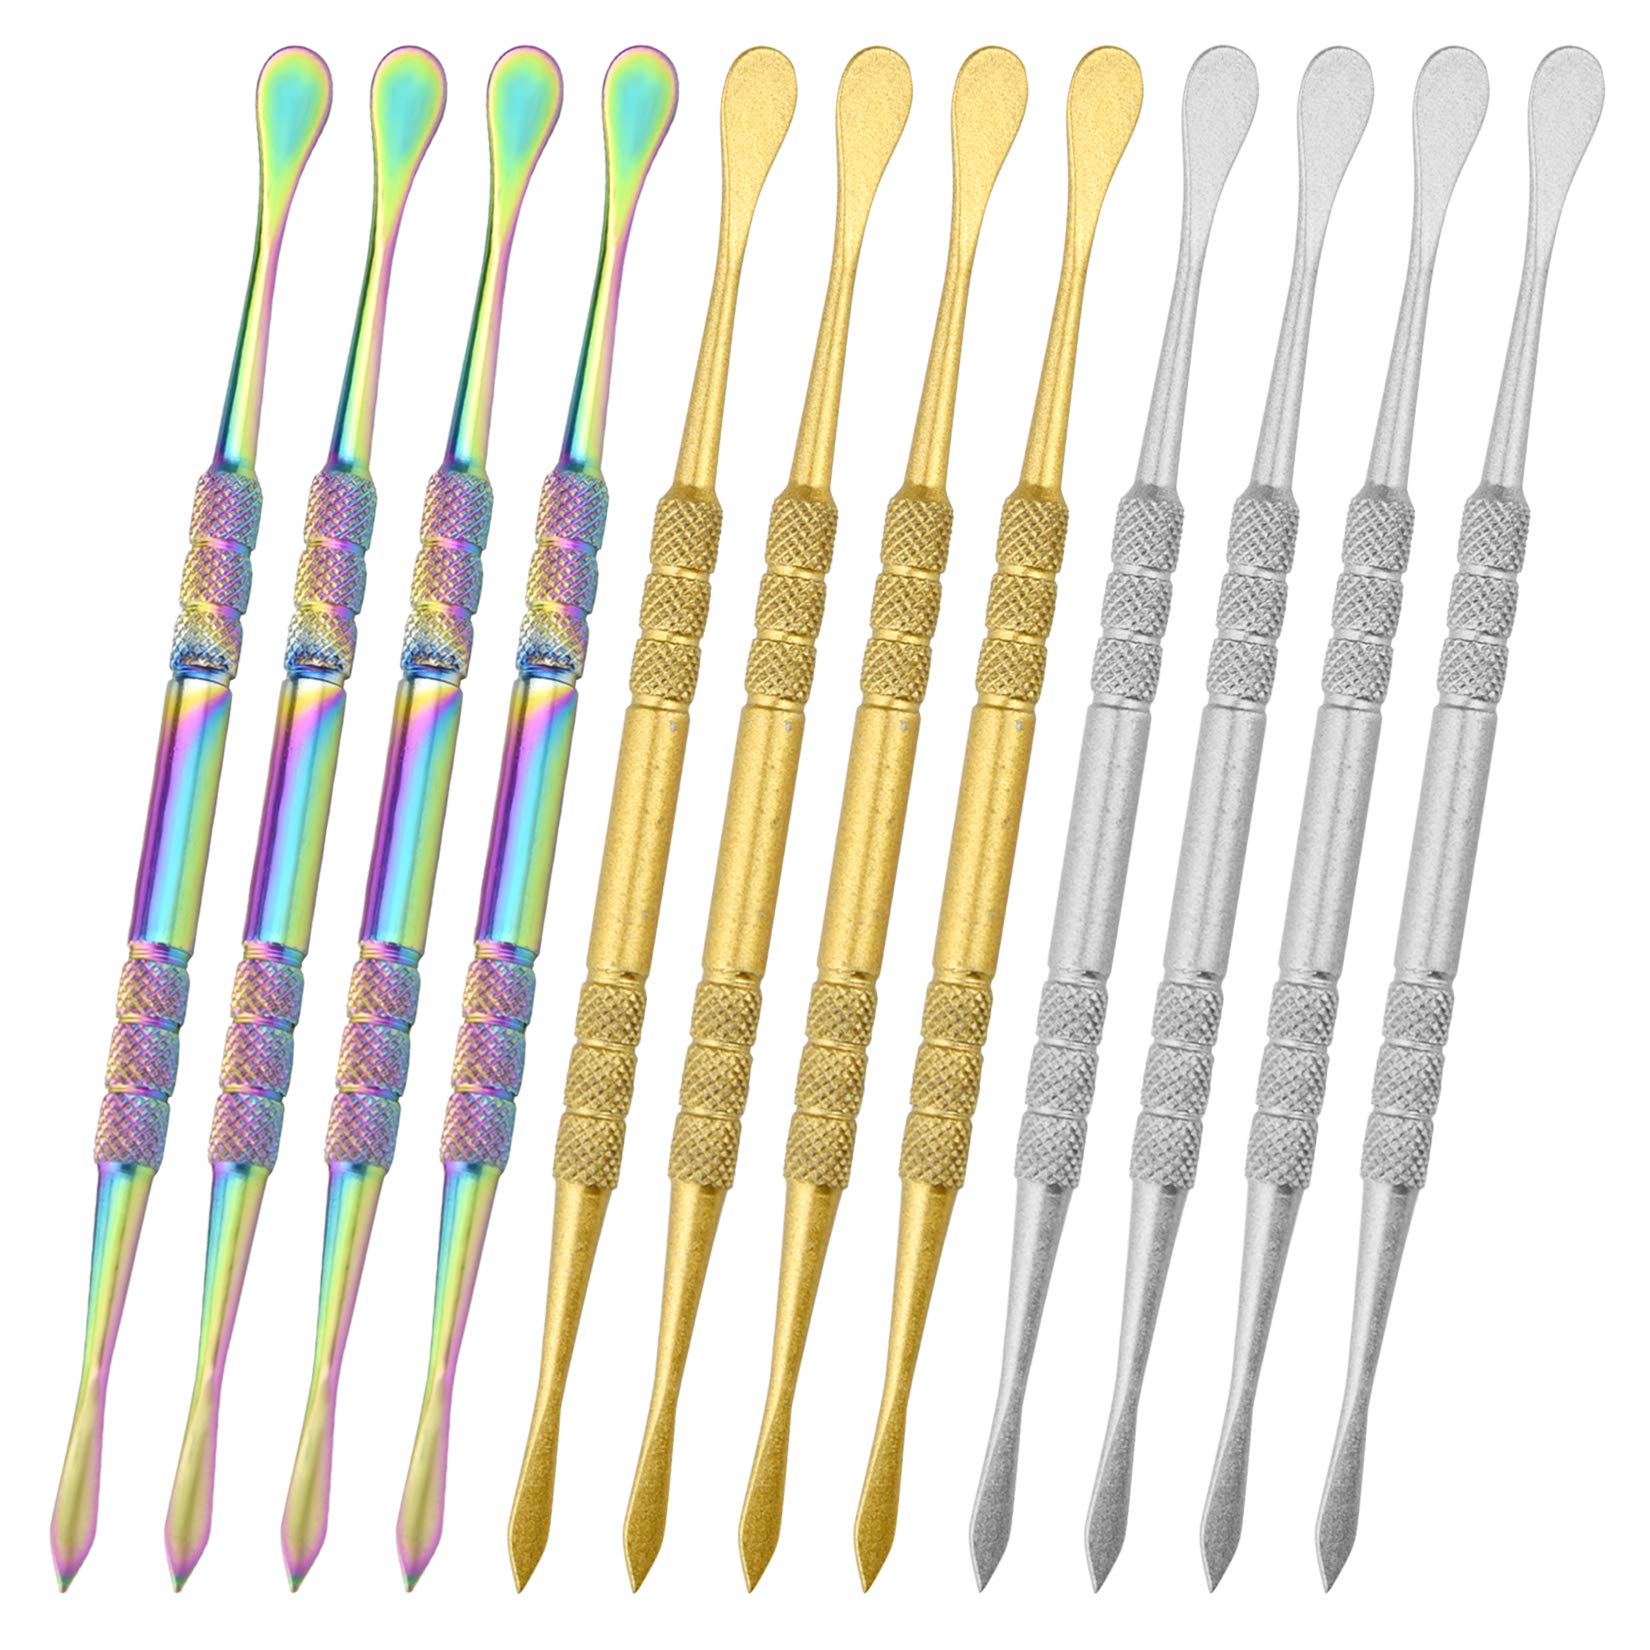 12 Packs Wax Carving Tool Stainless Steel Sculpting Tool Spoon Carving Tool  4.75 Inch (Silver+